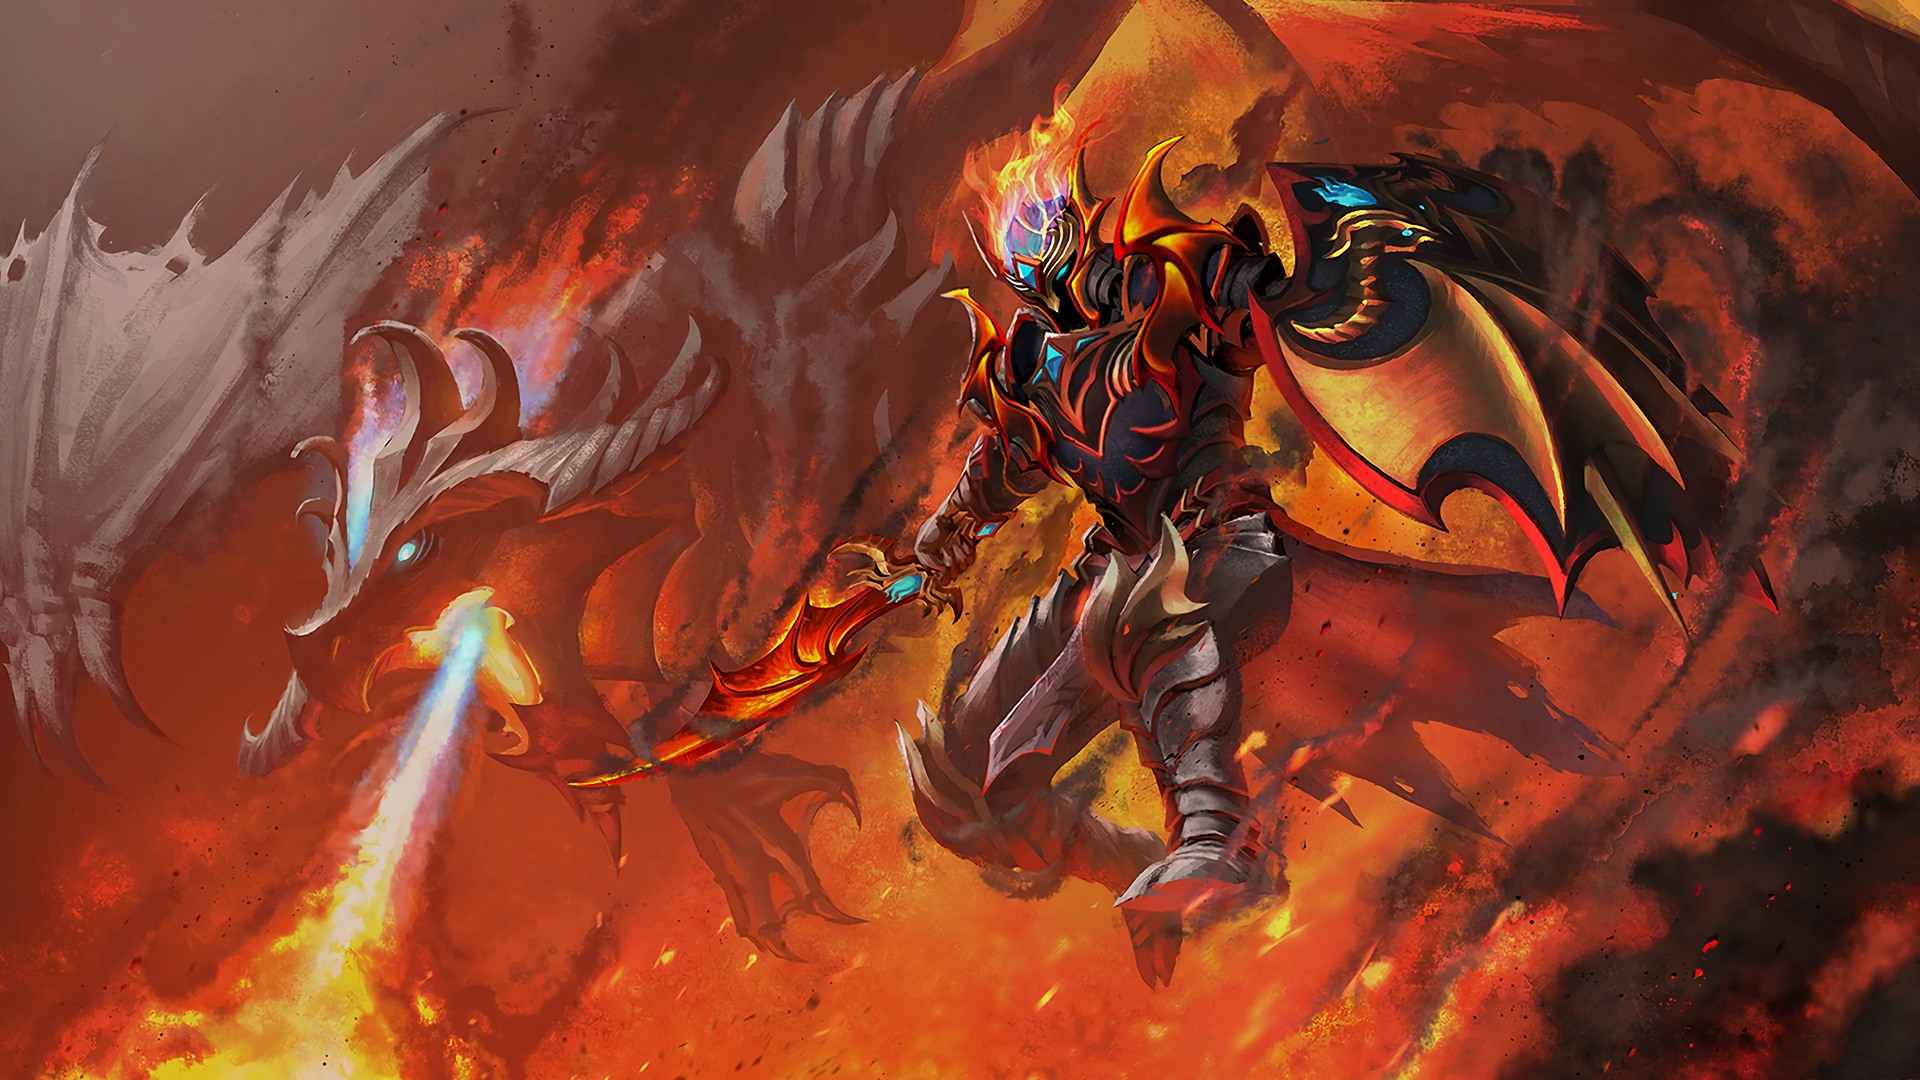 Epic Anime Wallpapers Wallpaper - Dragon Knight 3 Star Underlords -  1920x1080 Wallpaper 